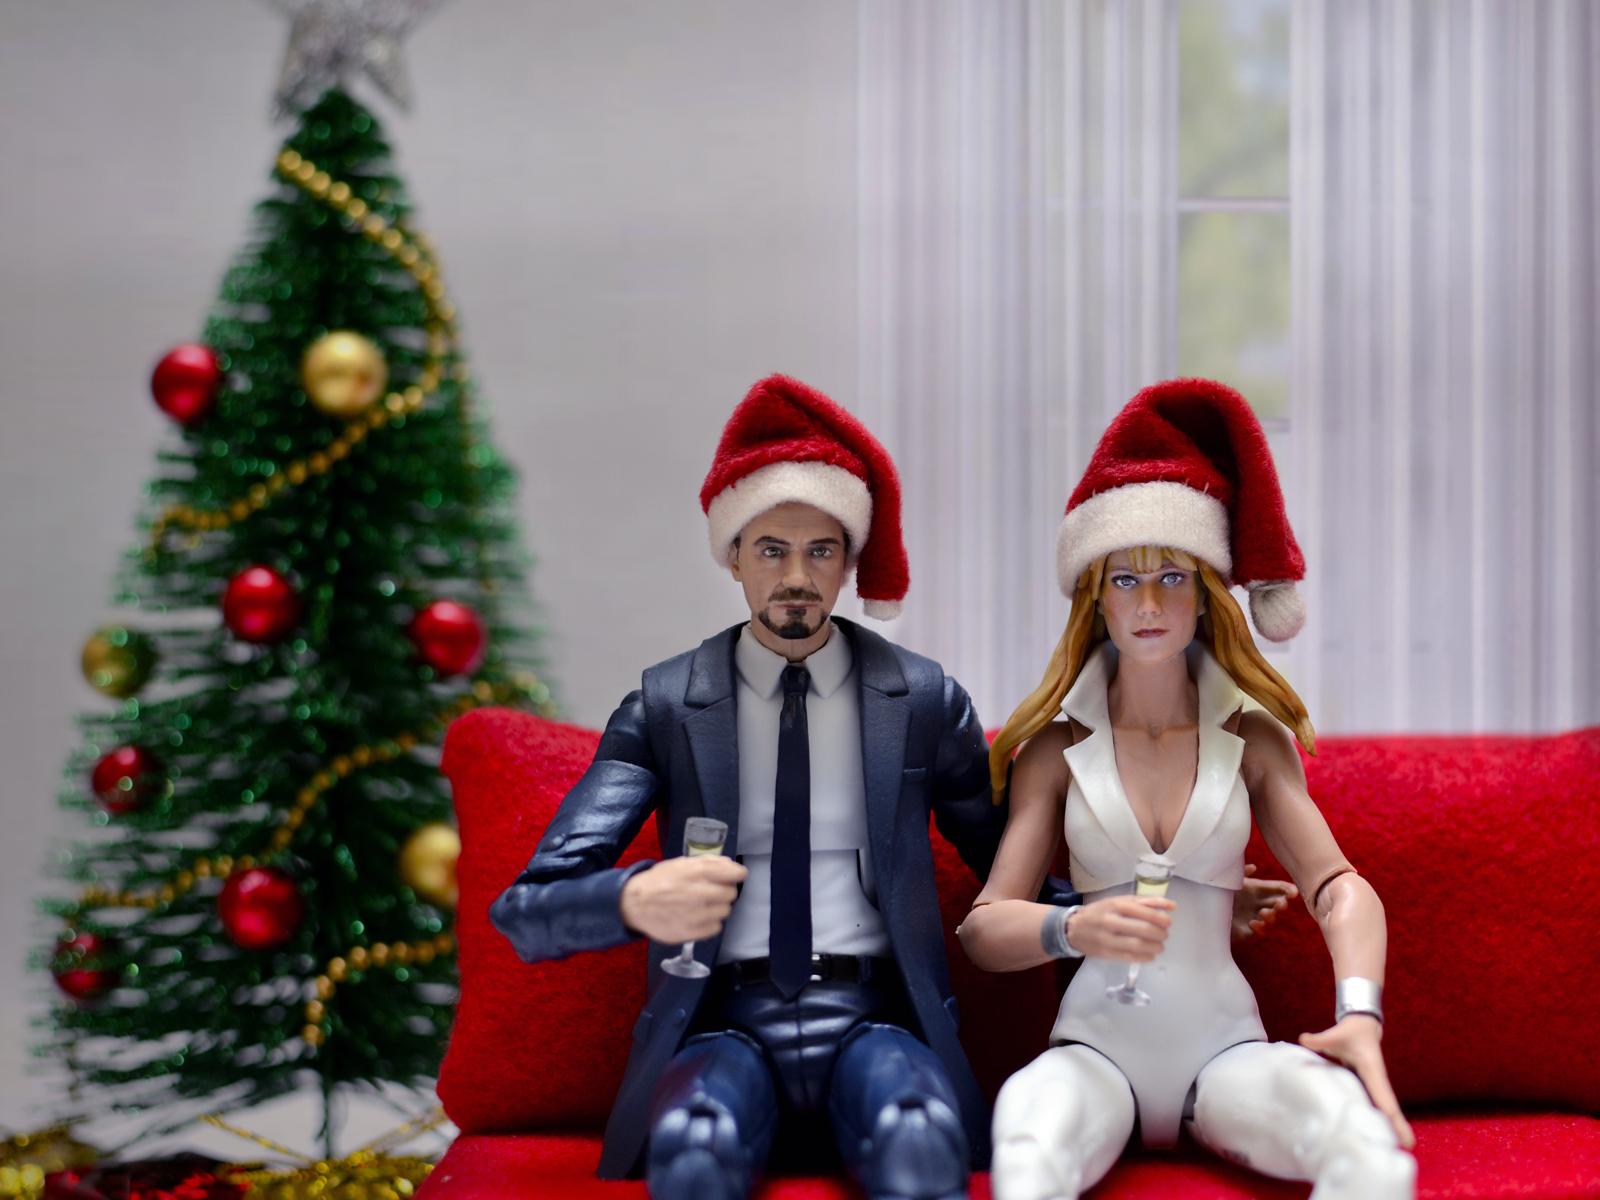 Tony Stark's Christmas Eve Party with Pepper Potts